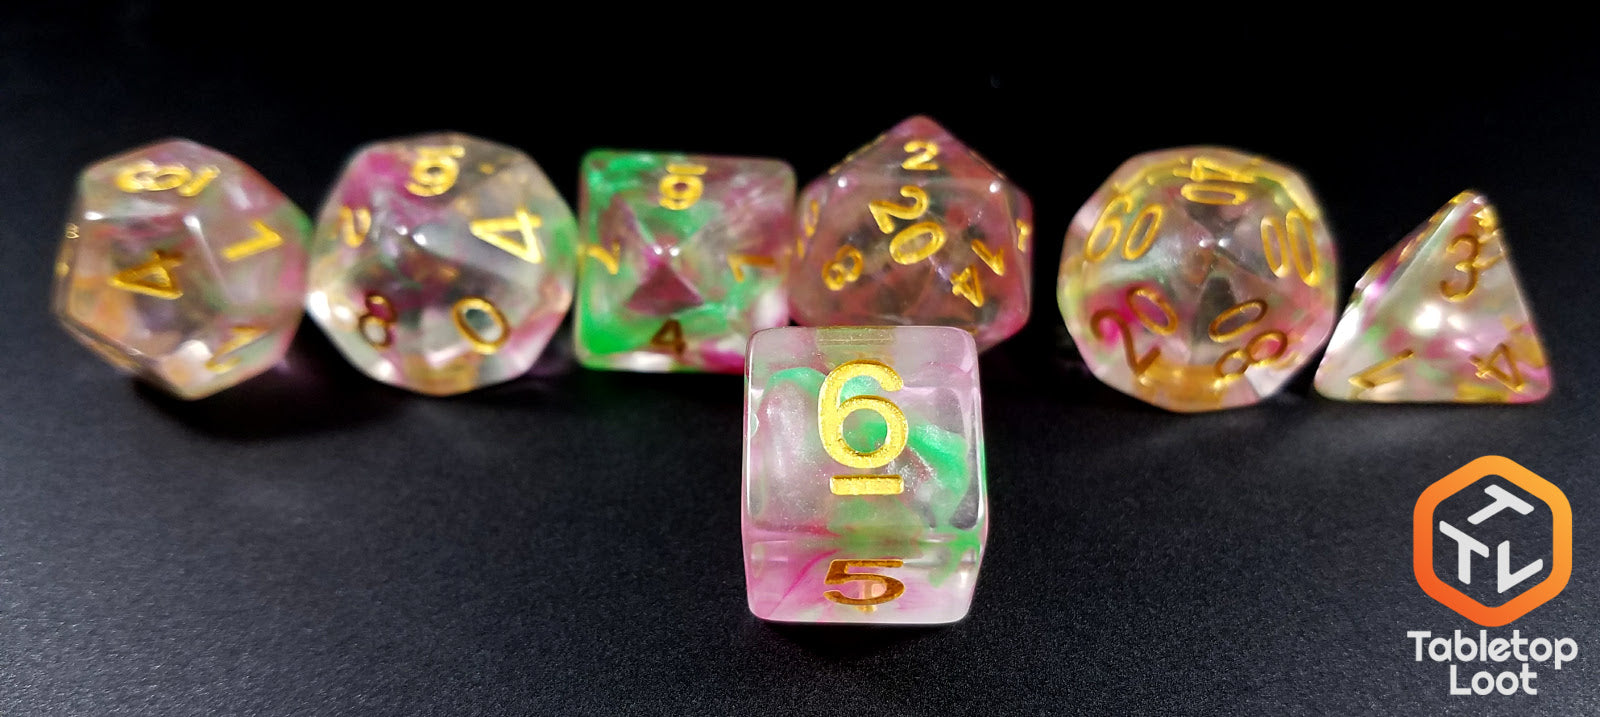 A close up of the D6 from the Fae Berry 7 piece dice set from Tabletop Loot with pink and green swirls through clear resin and gold numbering.